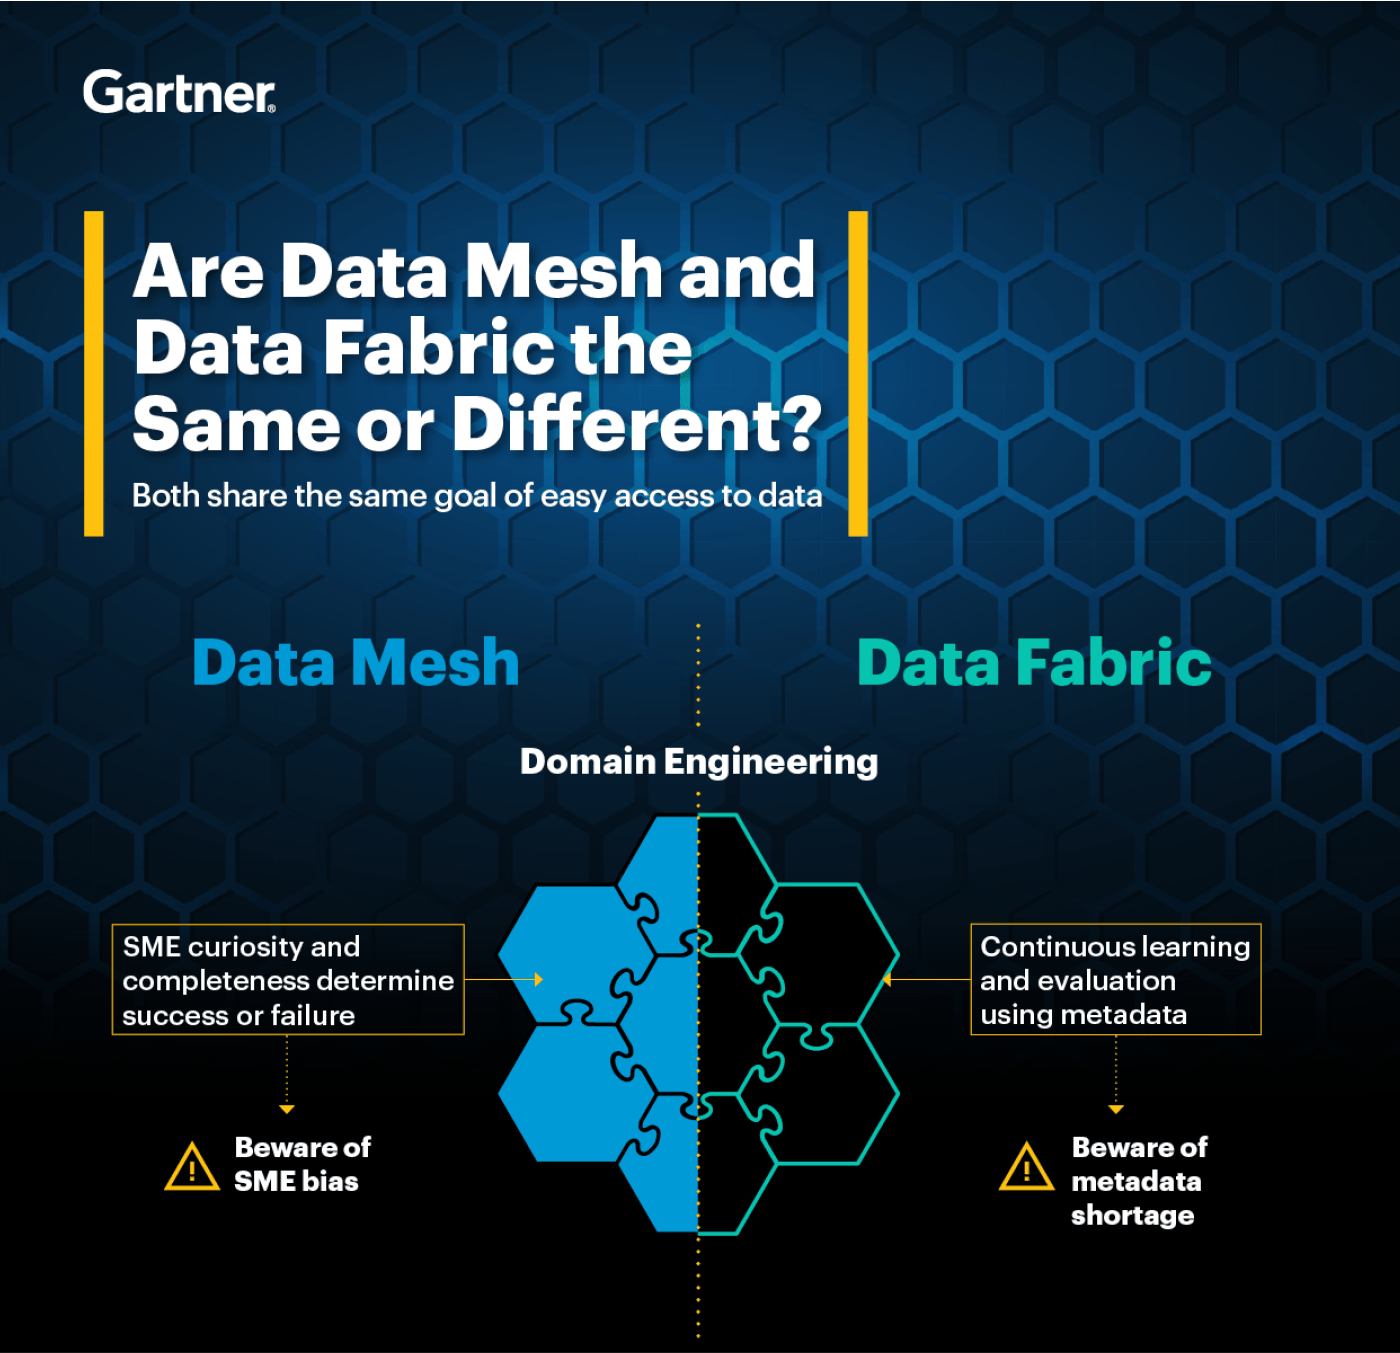 Excerpted image from Gartner’s Data Mesh and Data Fabric the Same or Different?